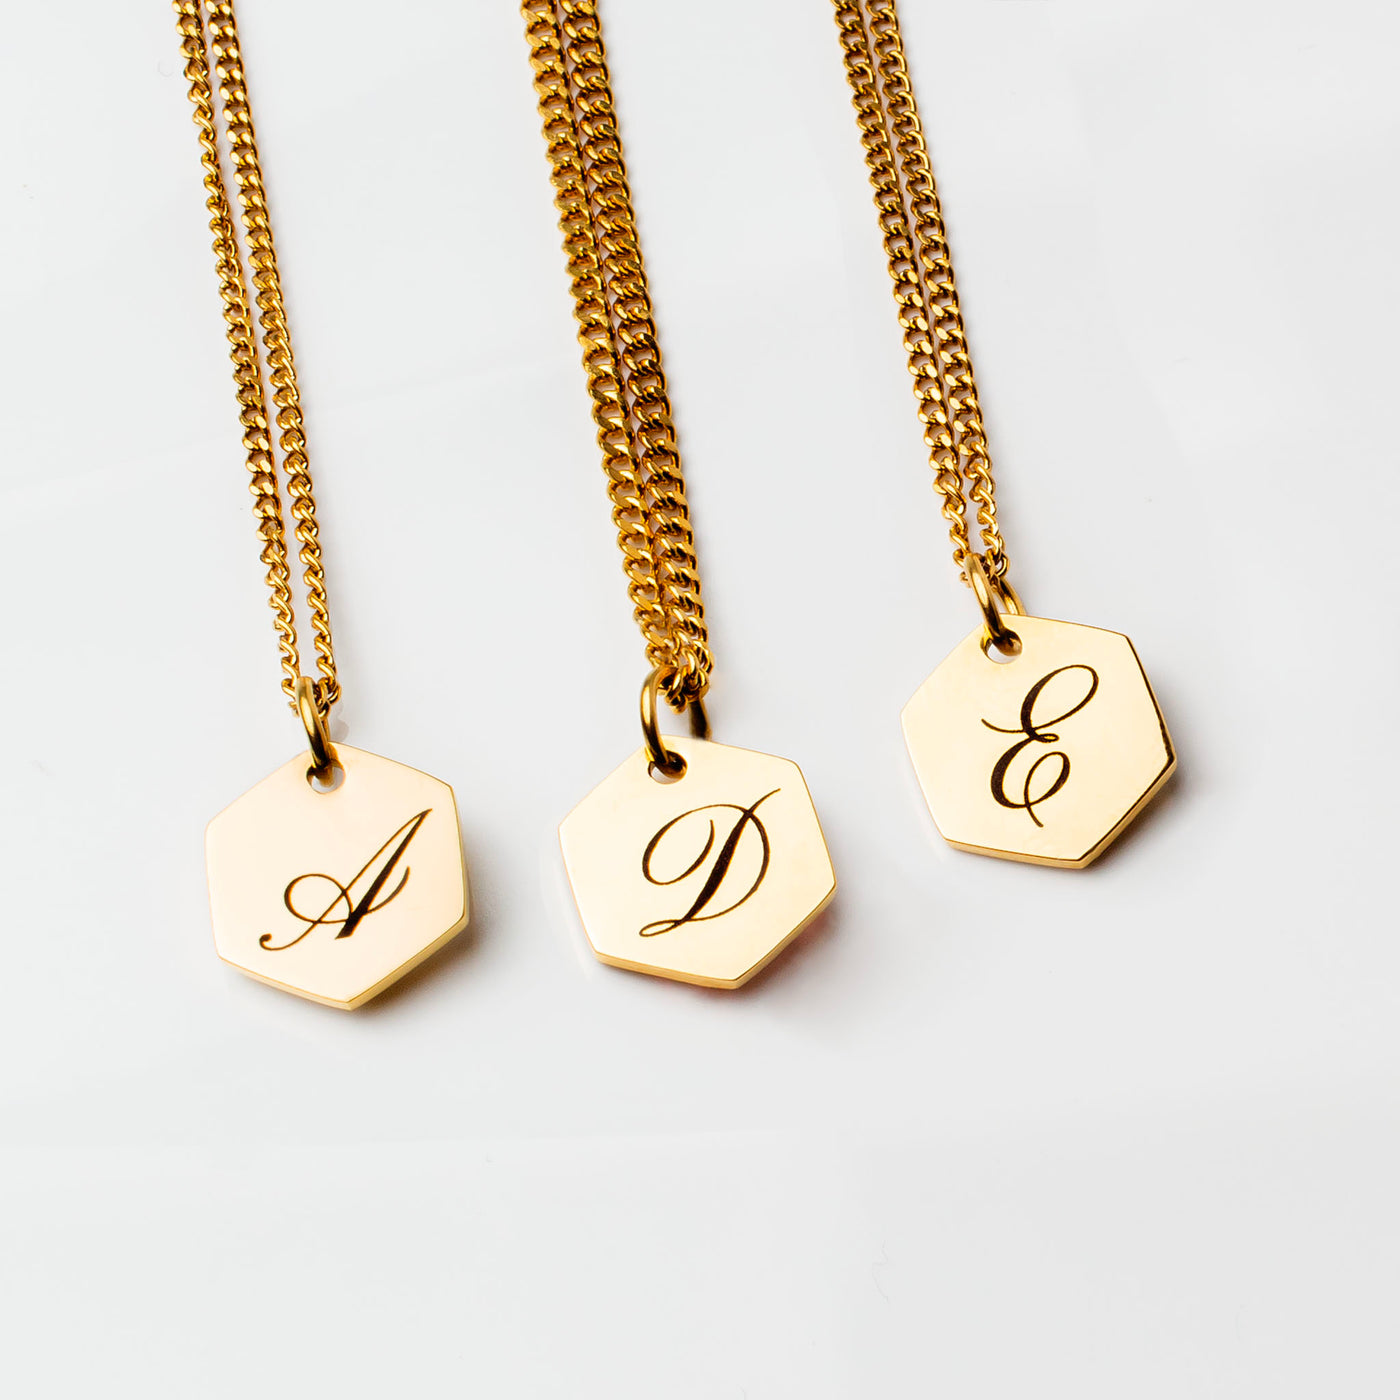 Amore Engraved Initial Letter Necklace - Gold